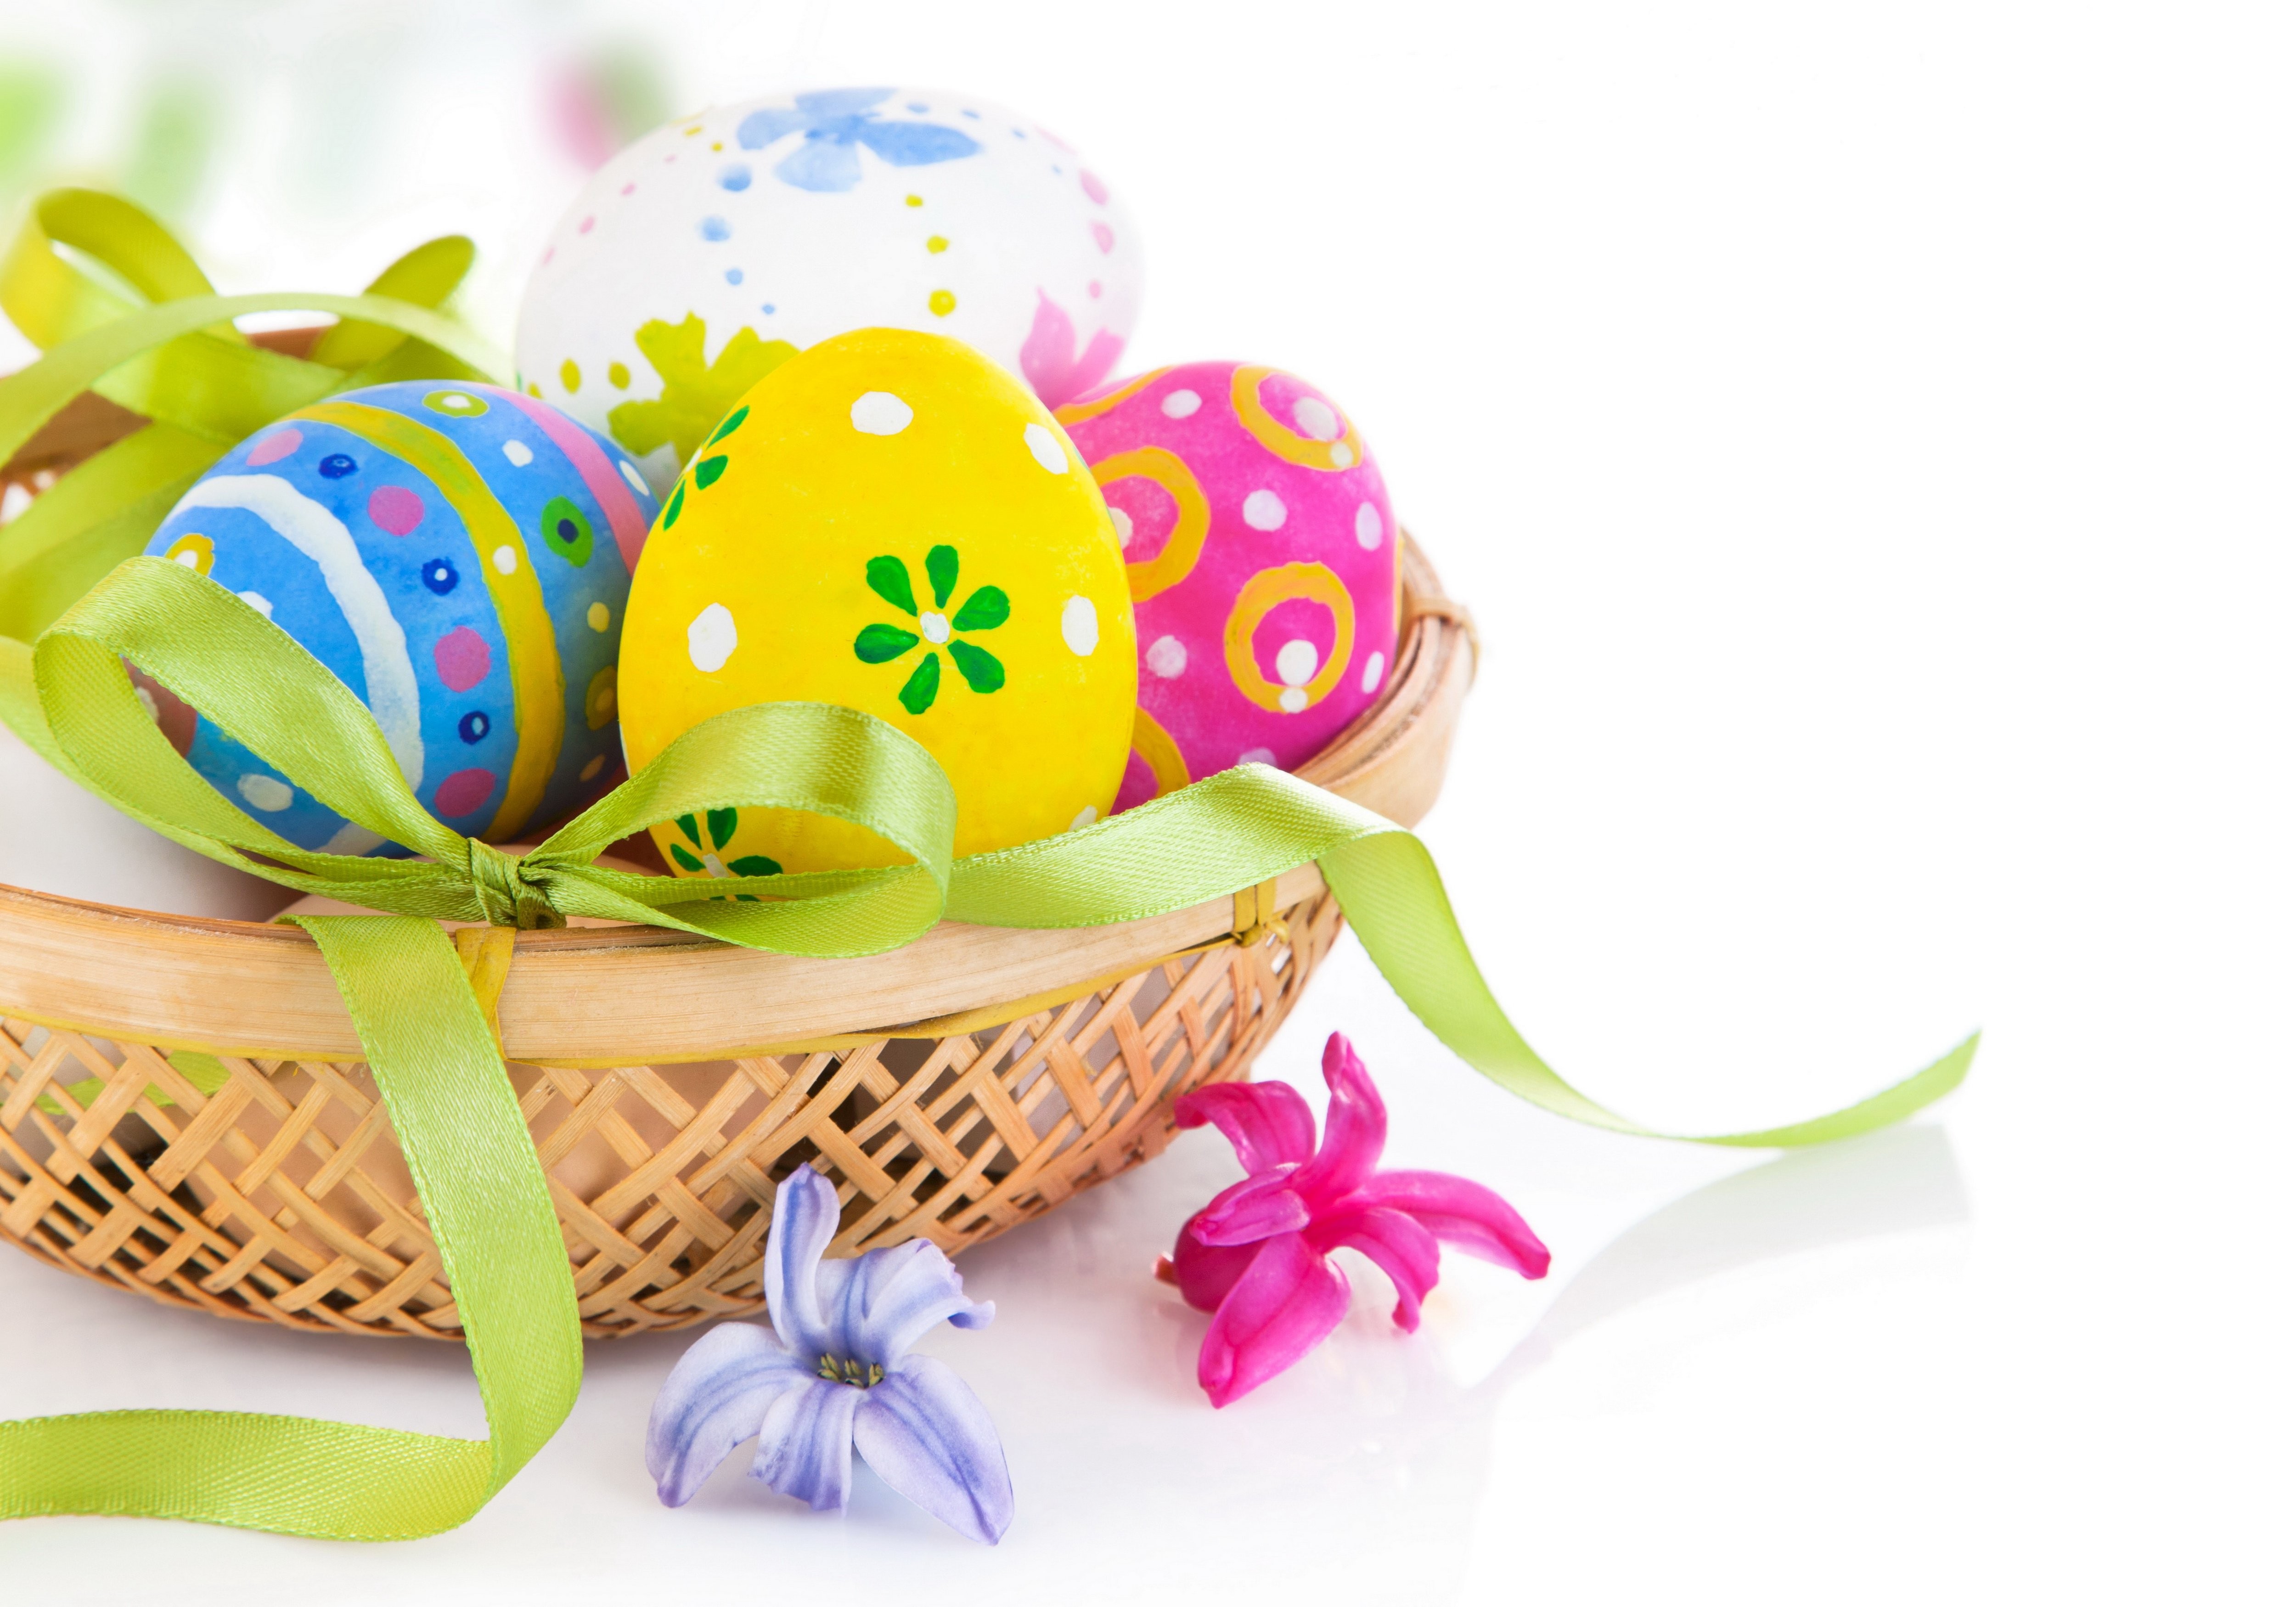 Happy Easter With Your Family - HD Wallpaper 